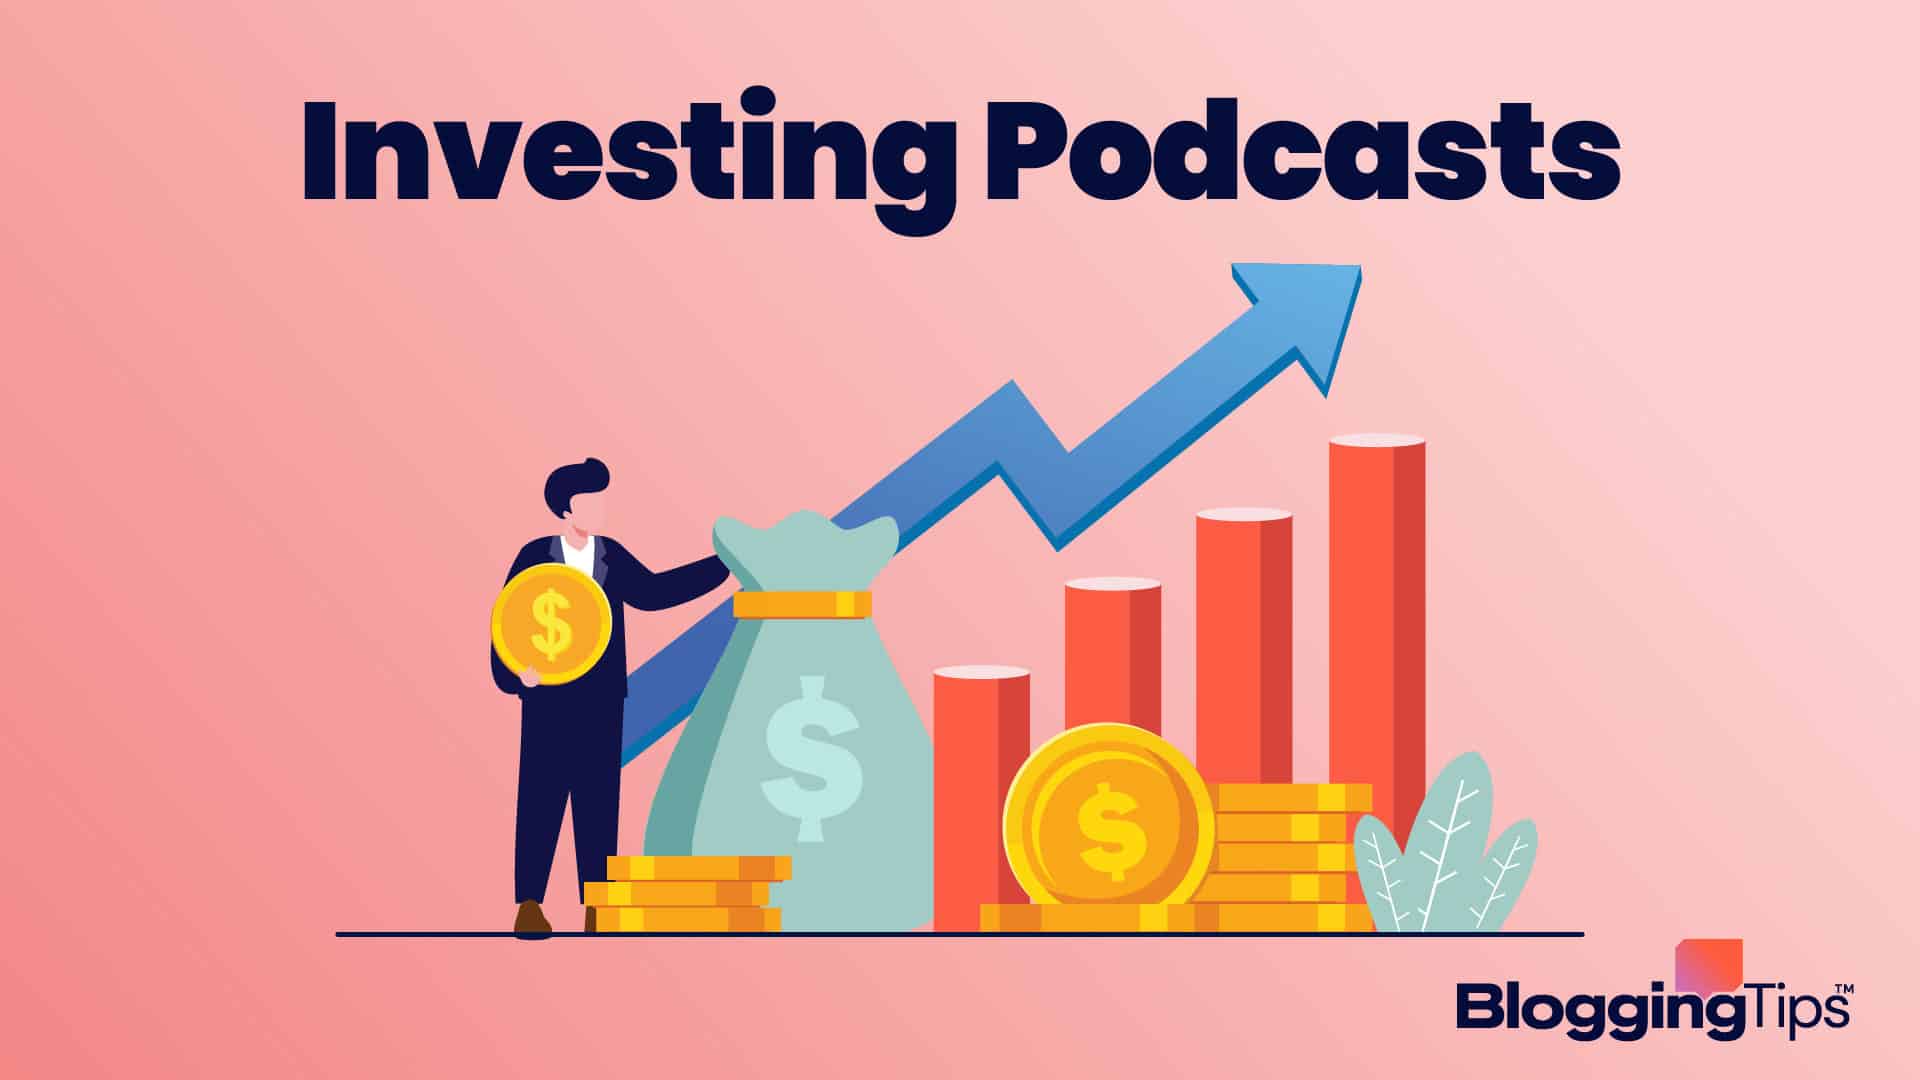 vector graphic showing an illustration of investing podcasts